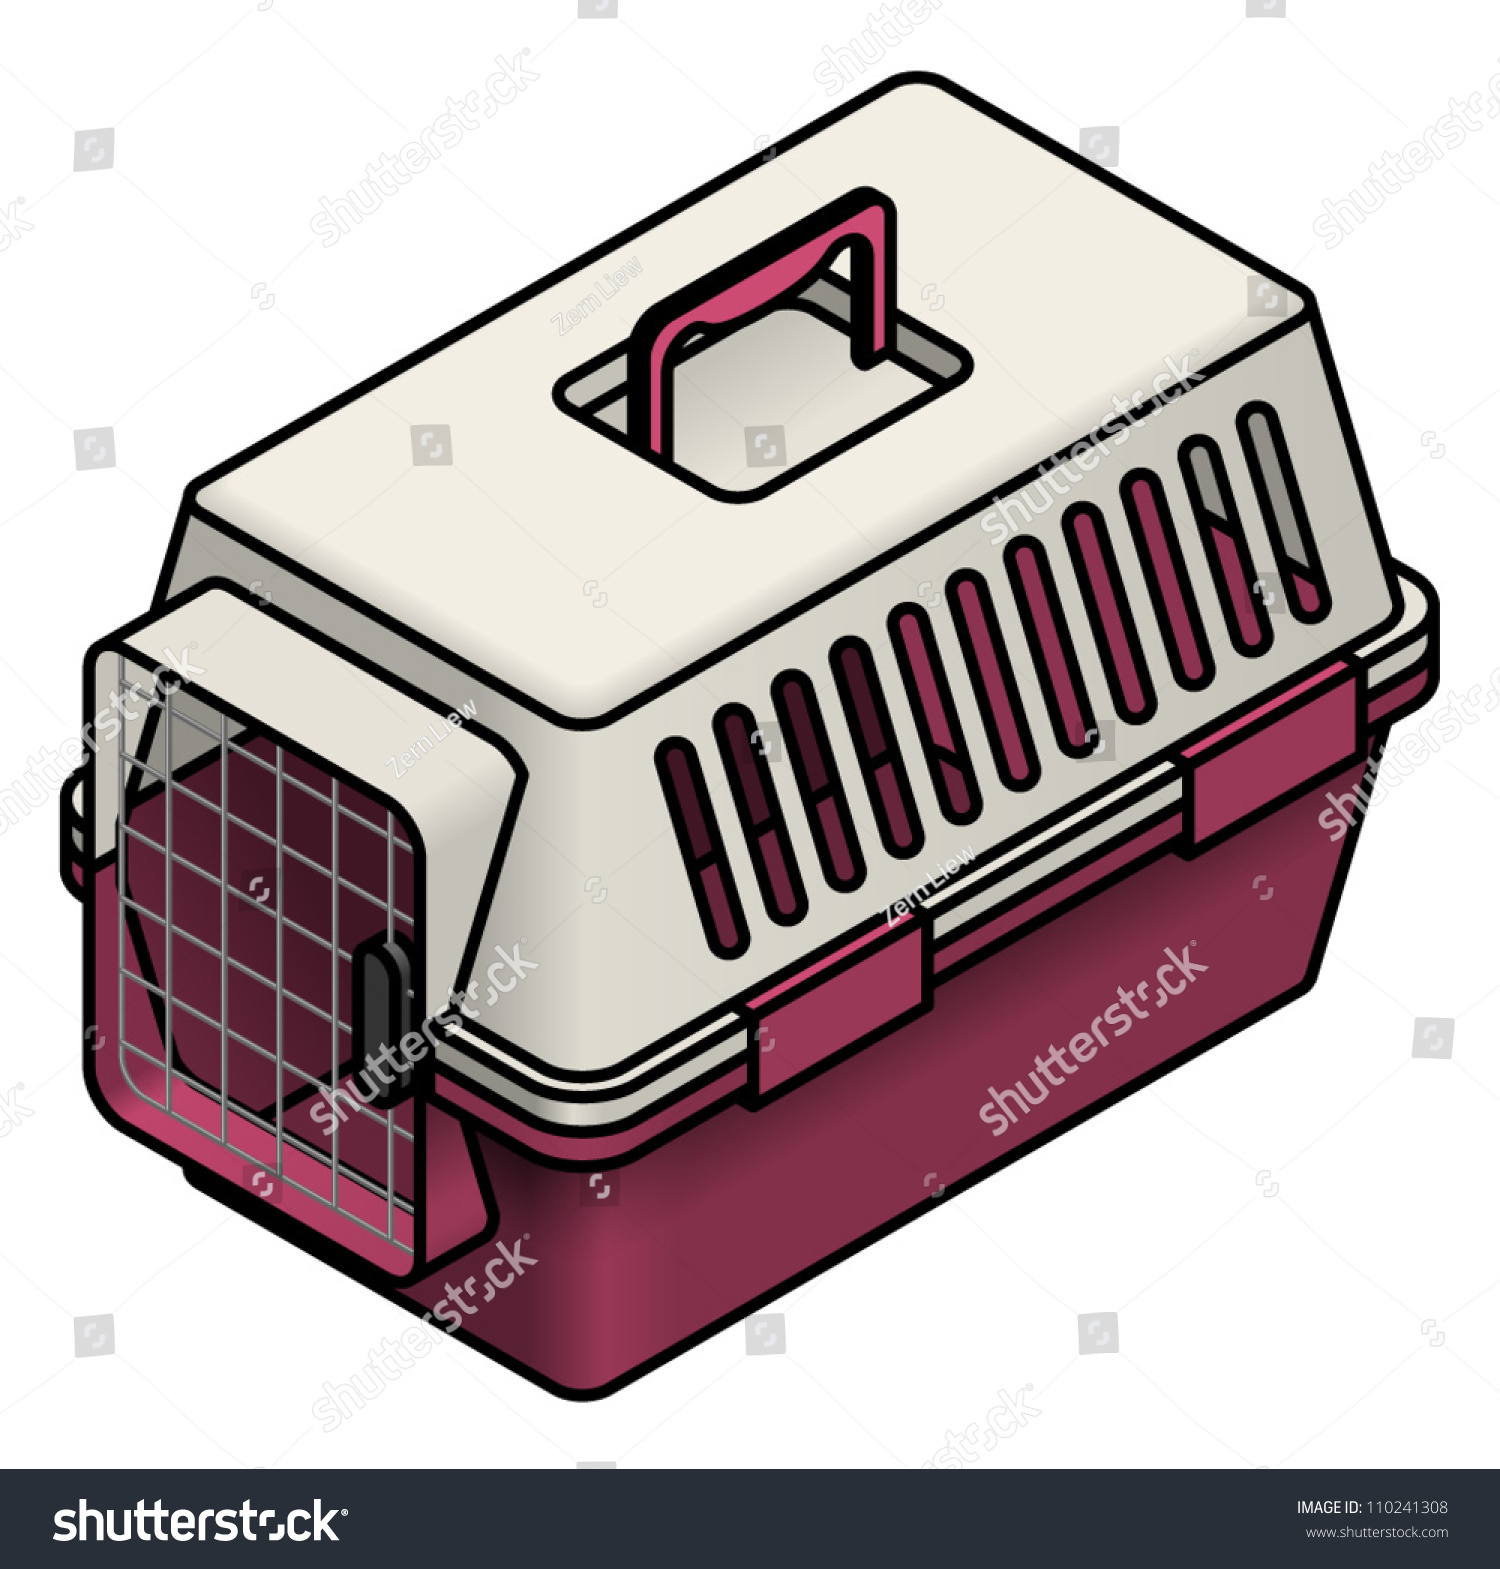 cat cage clipart - photo #19